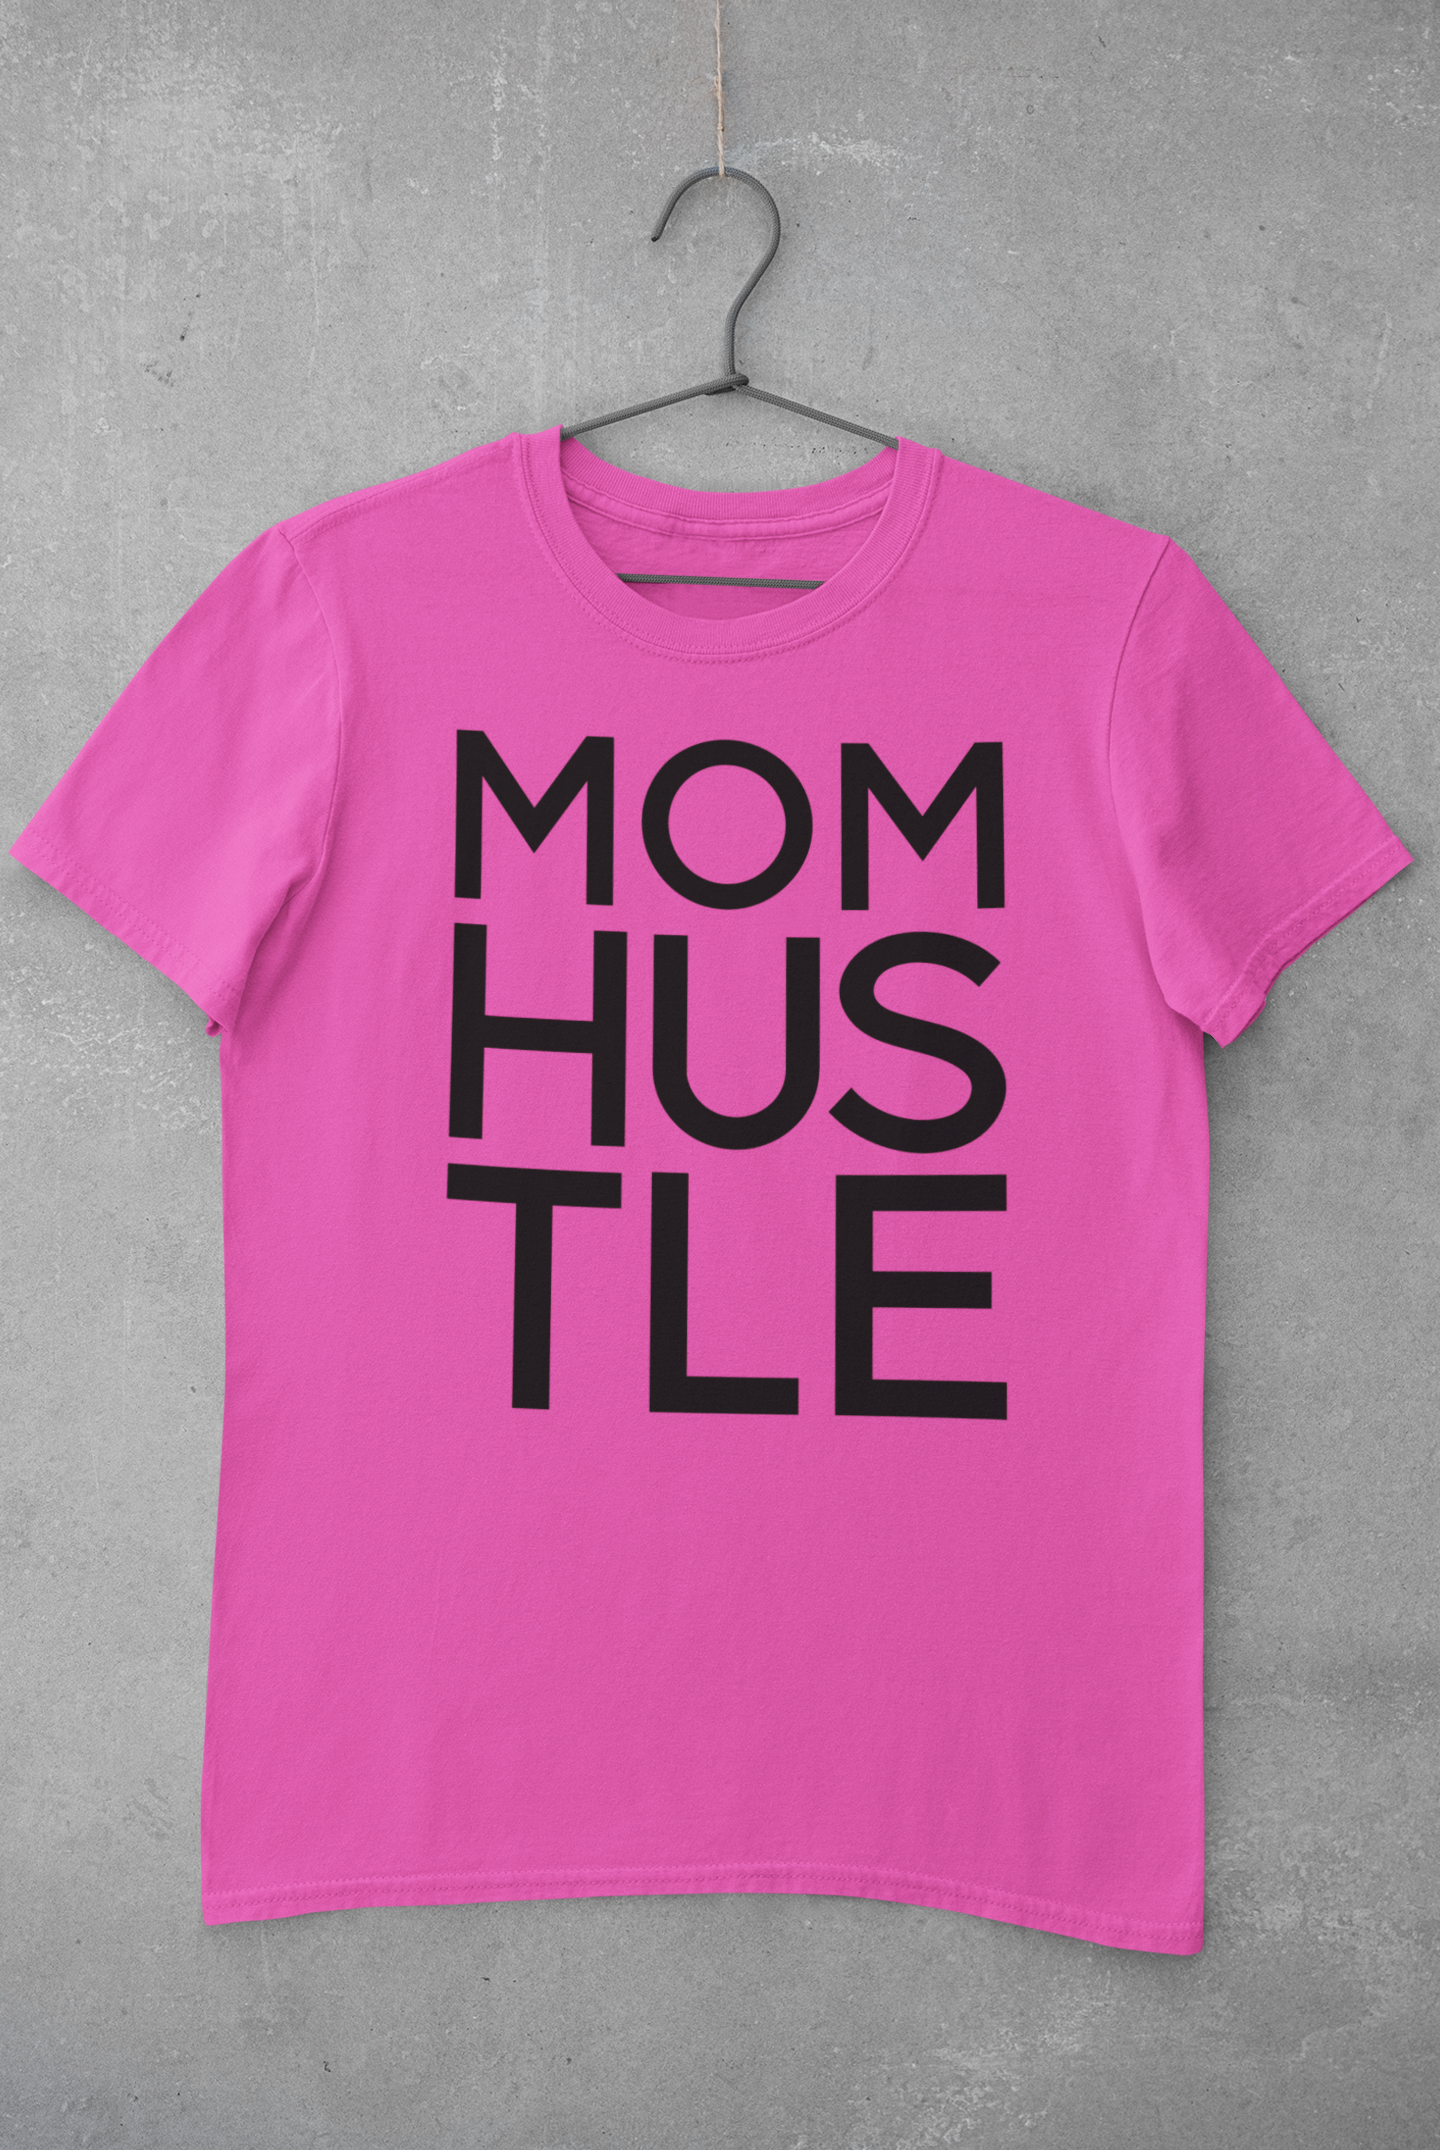 ' MOM HUSTLE' Adult Short Sleeve T-shirt Combed Ring Spun Cotton/ Polyester 4.06oz